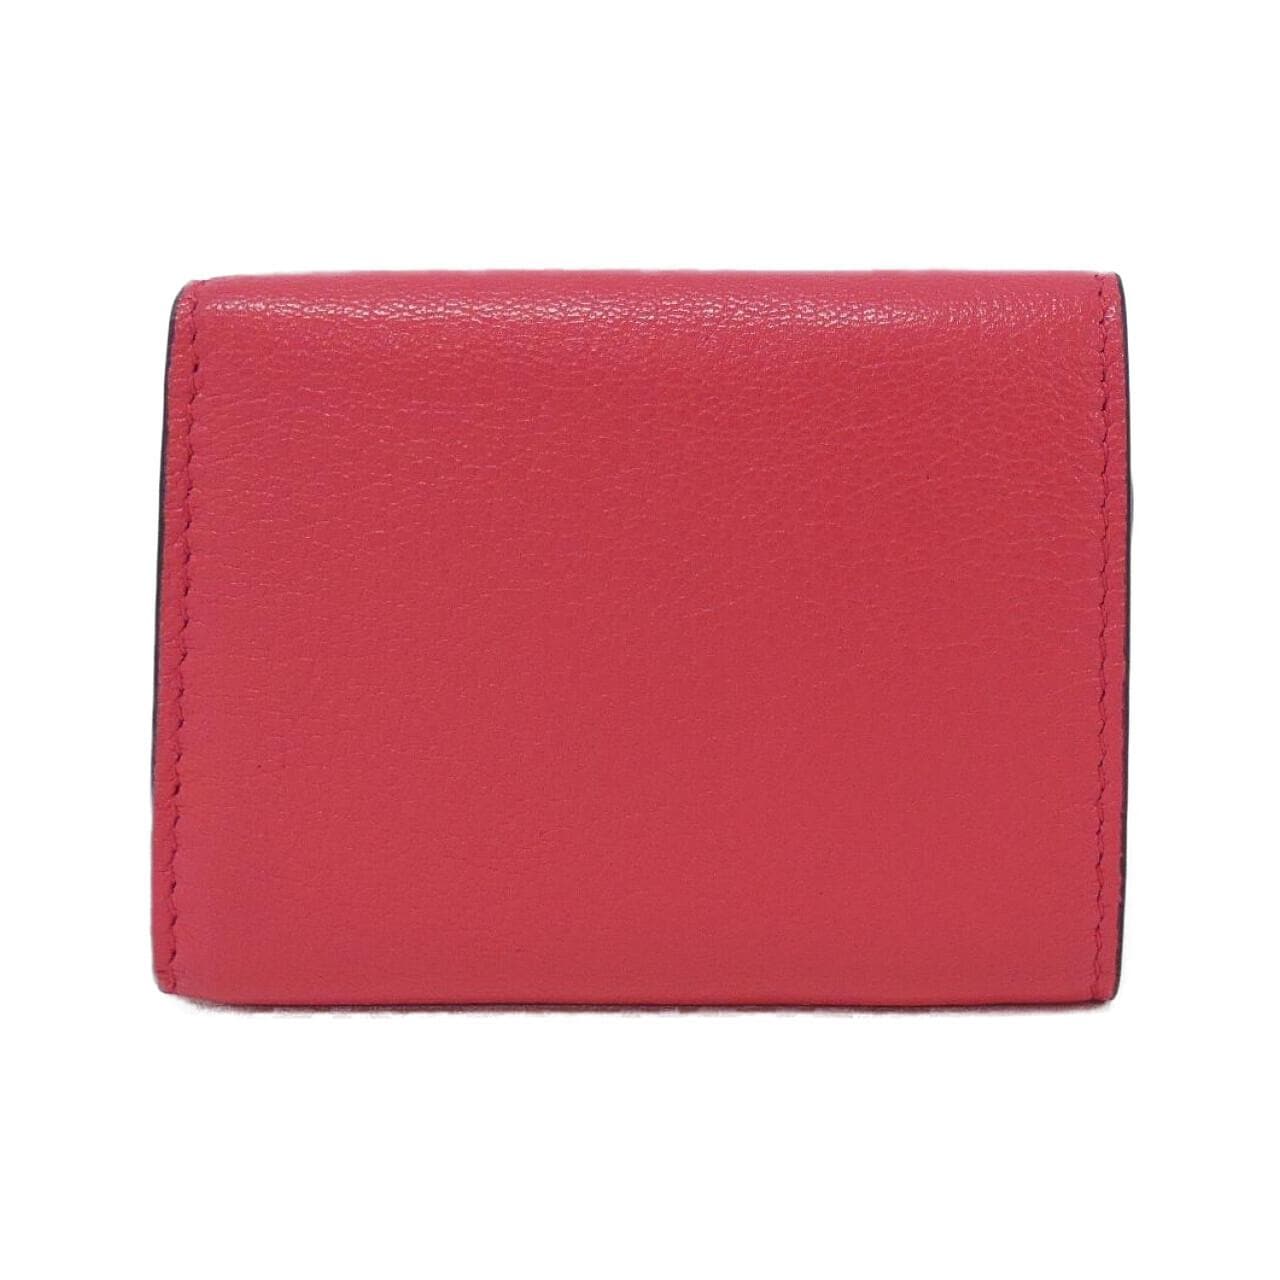 Christian DIOR Saddle S5653CCEH Wallet